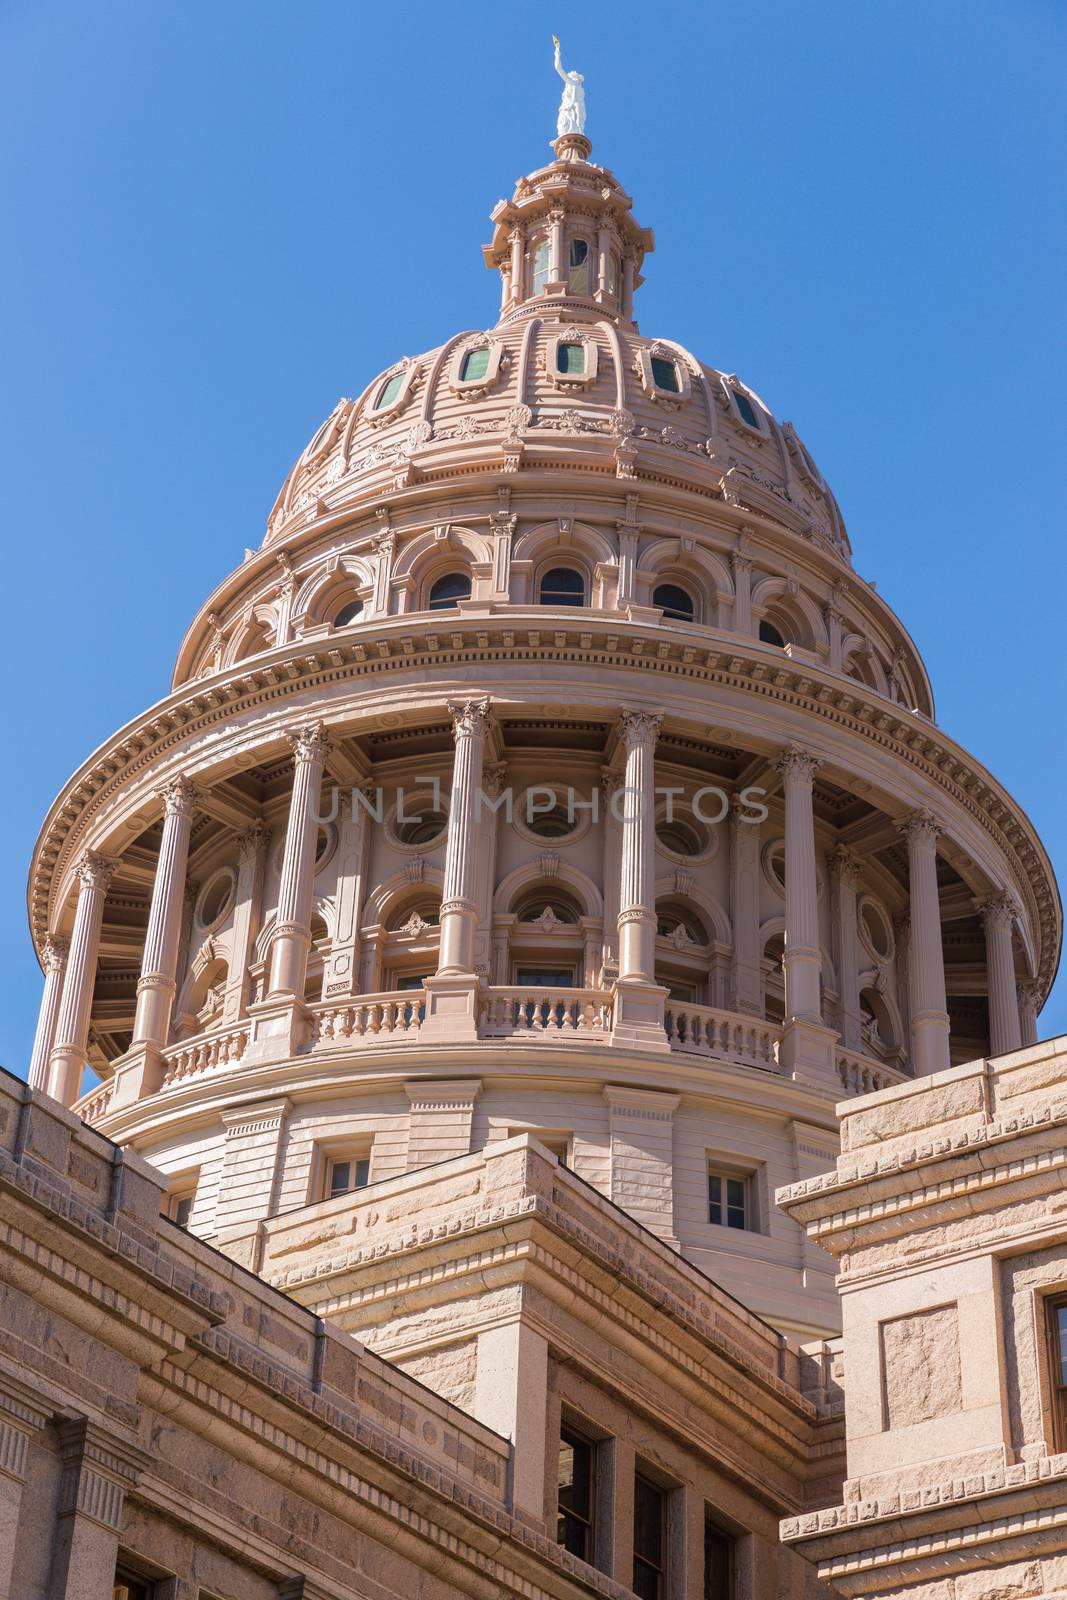 The Capitol Building in Austin Texas by chrisukphoto